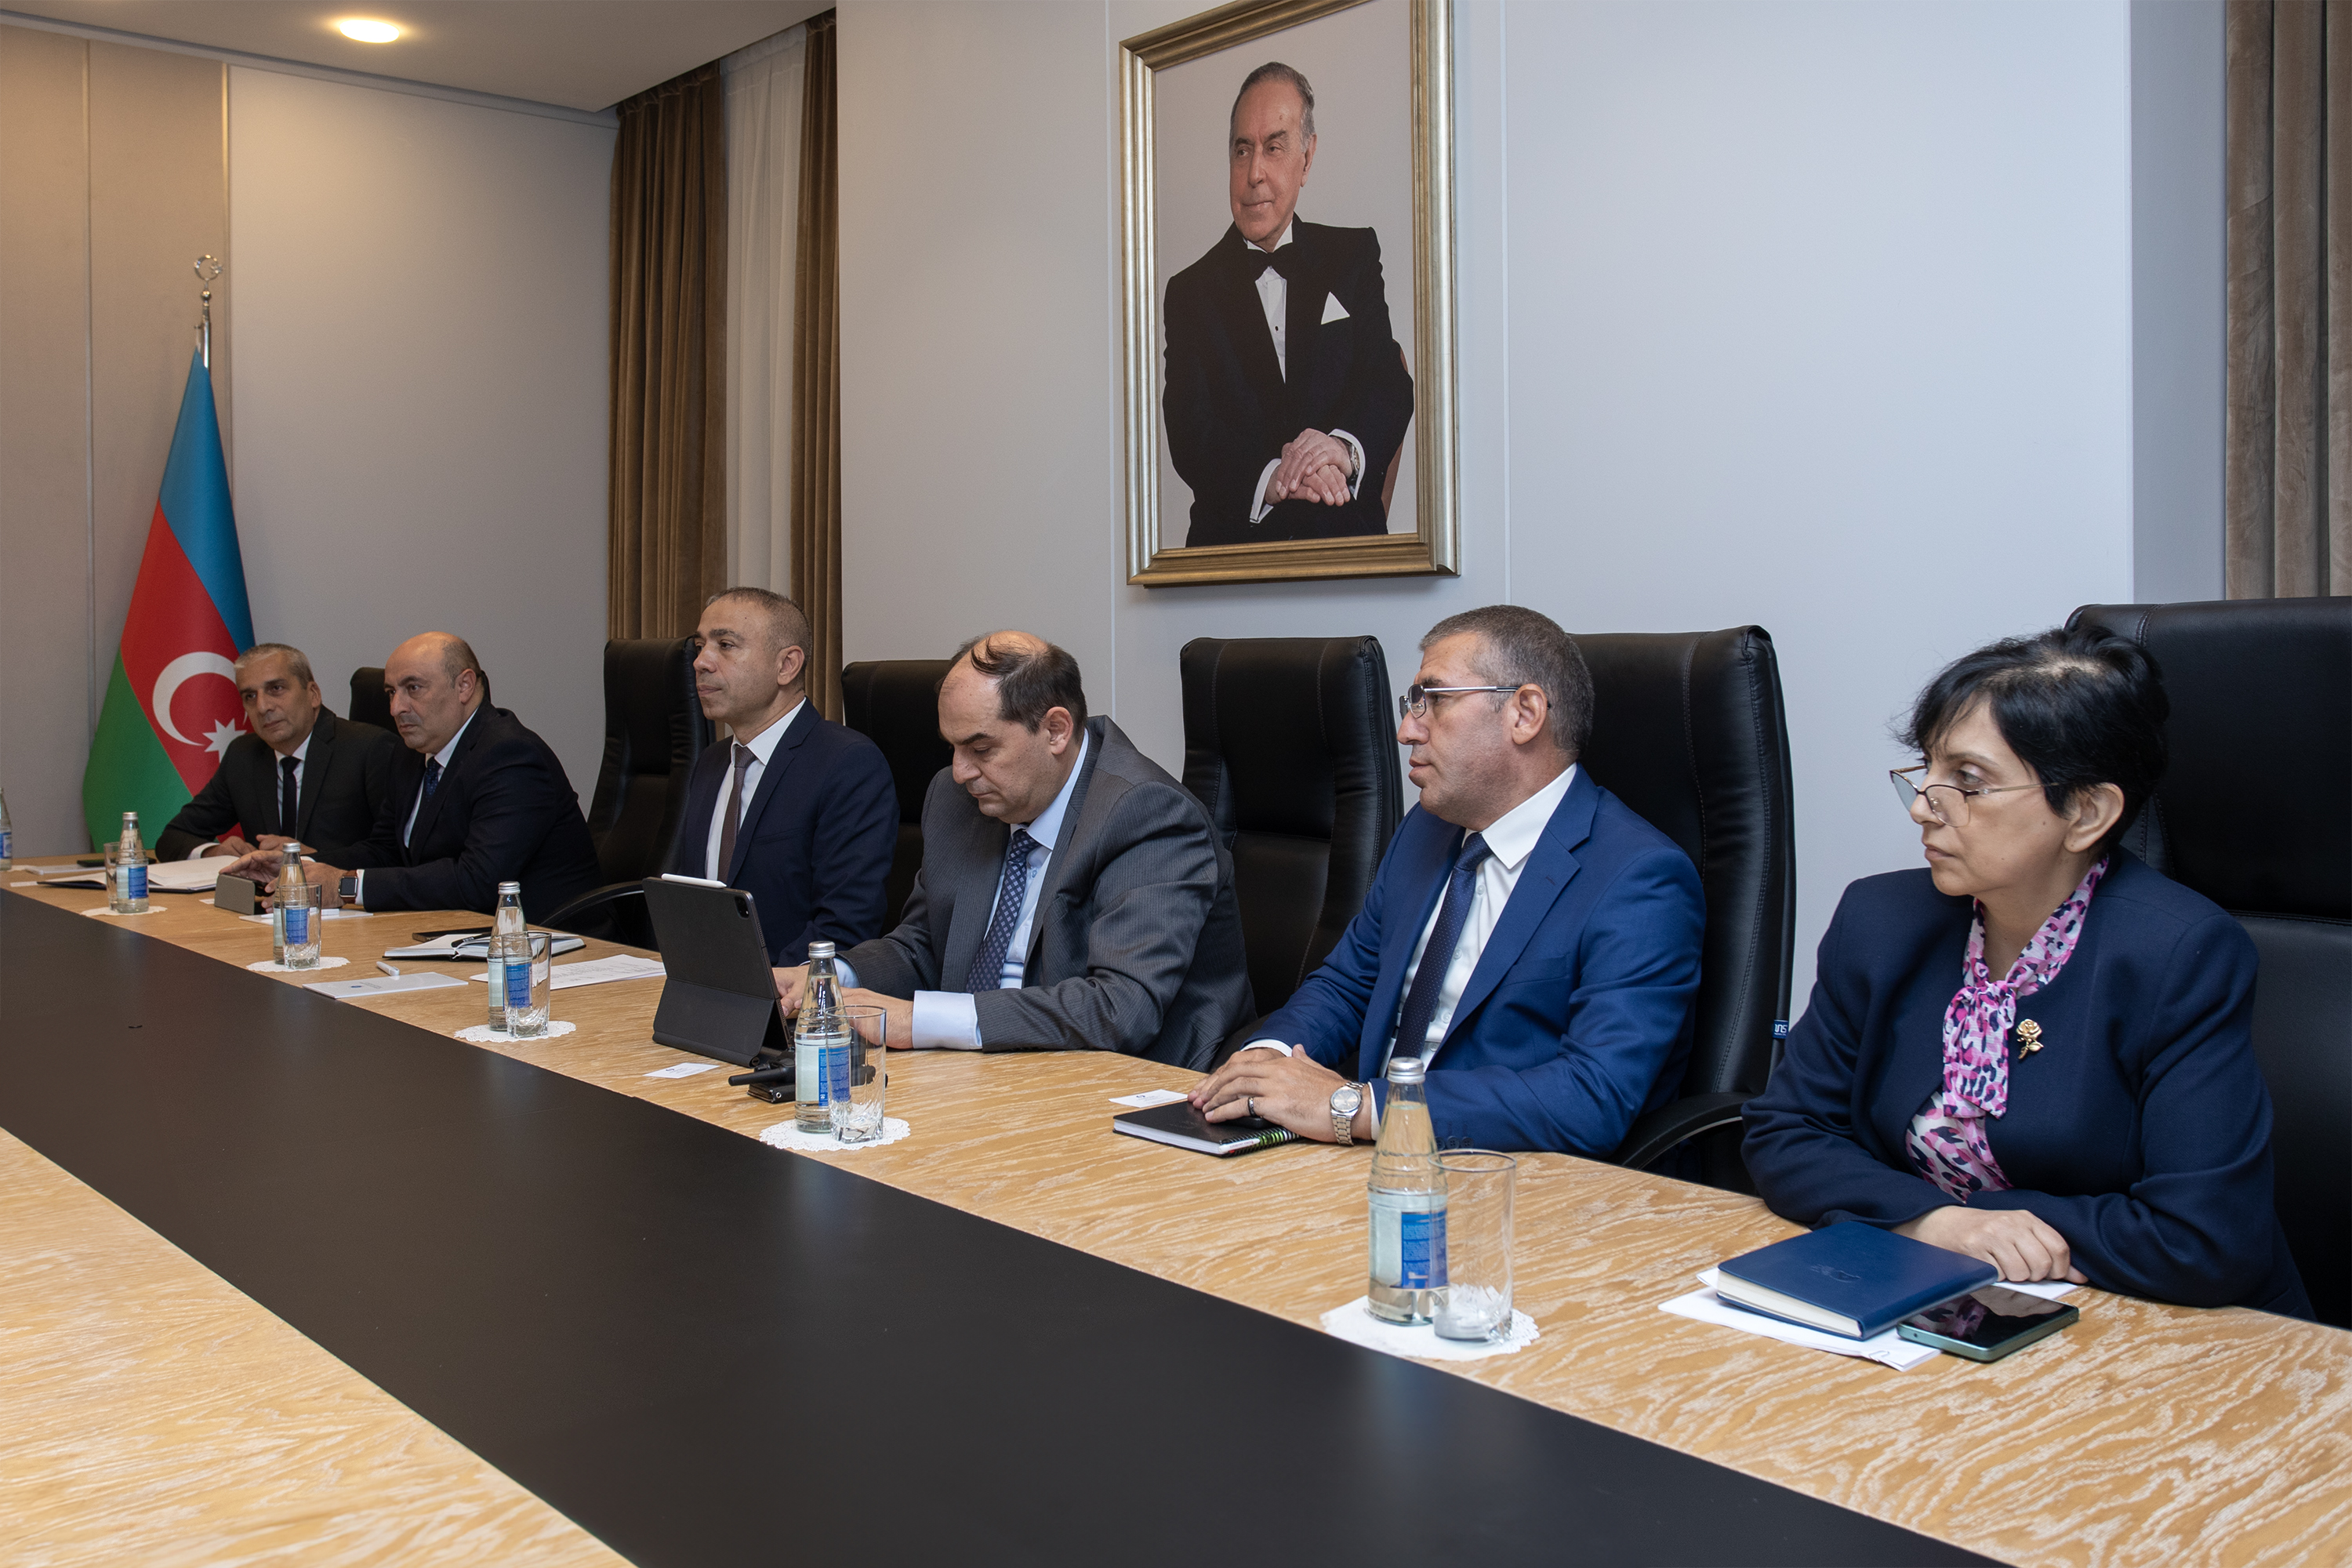 Issues arising from existing cooperation with EBRD discussed